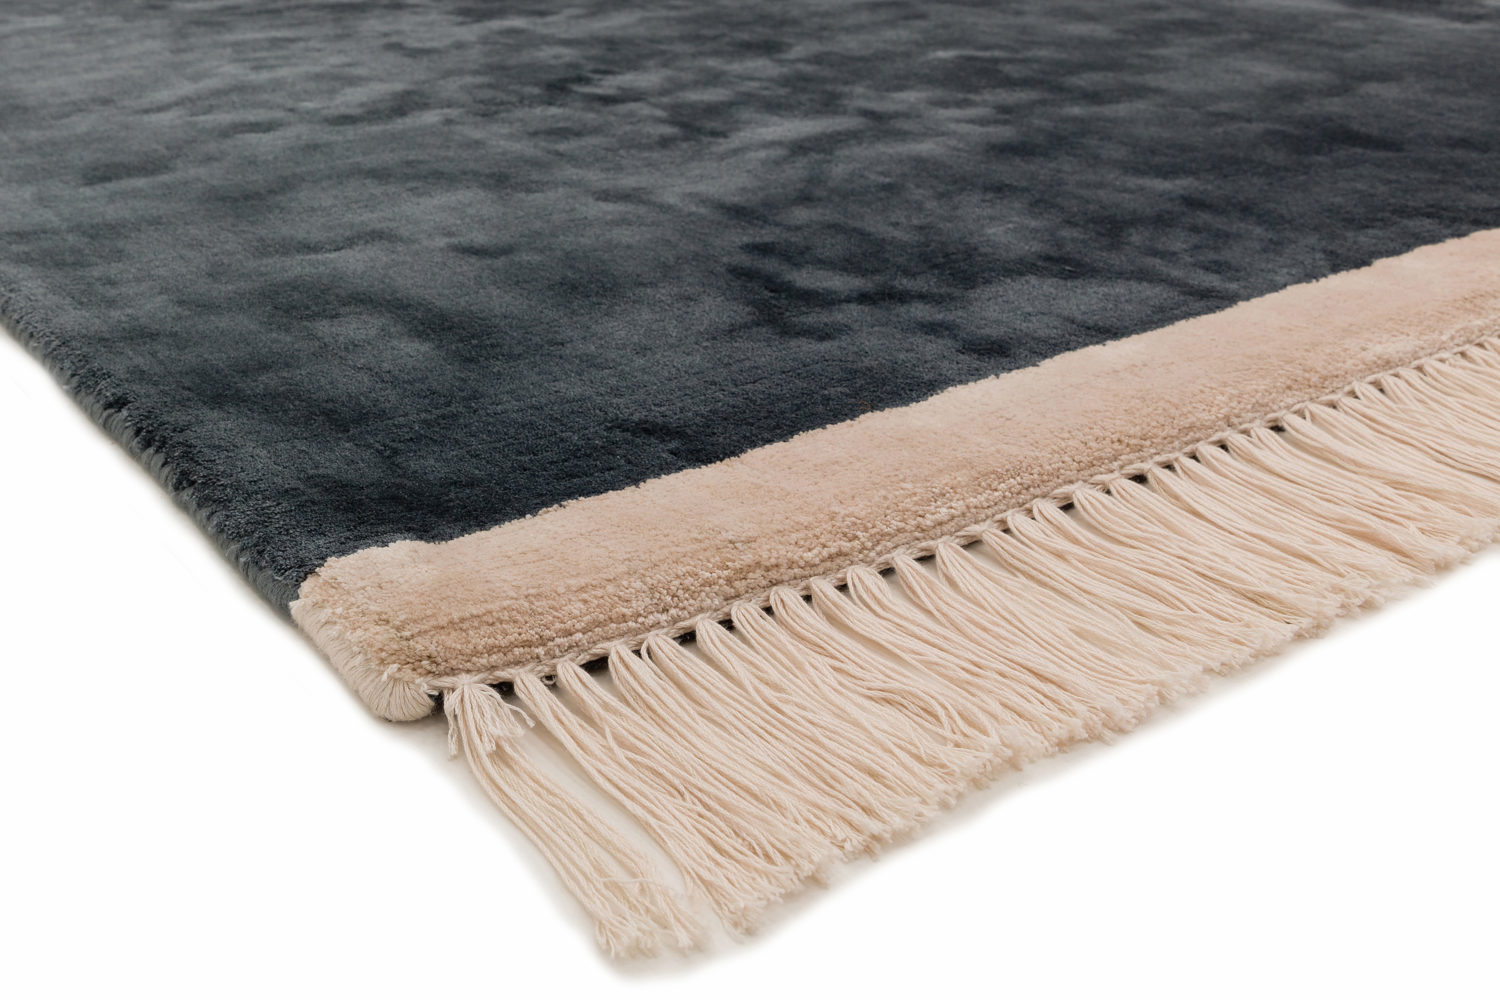 Decorative viscose rug with contrasting fringed borders